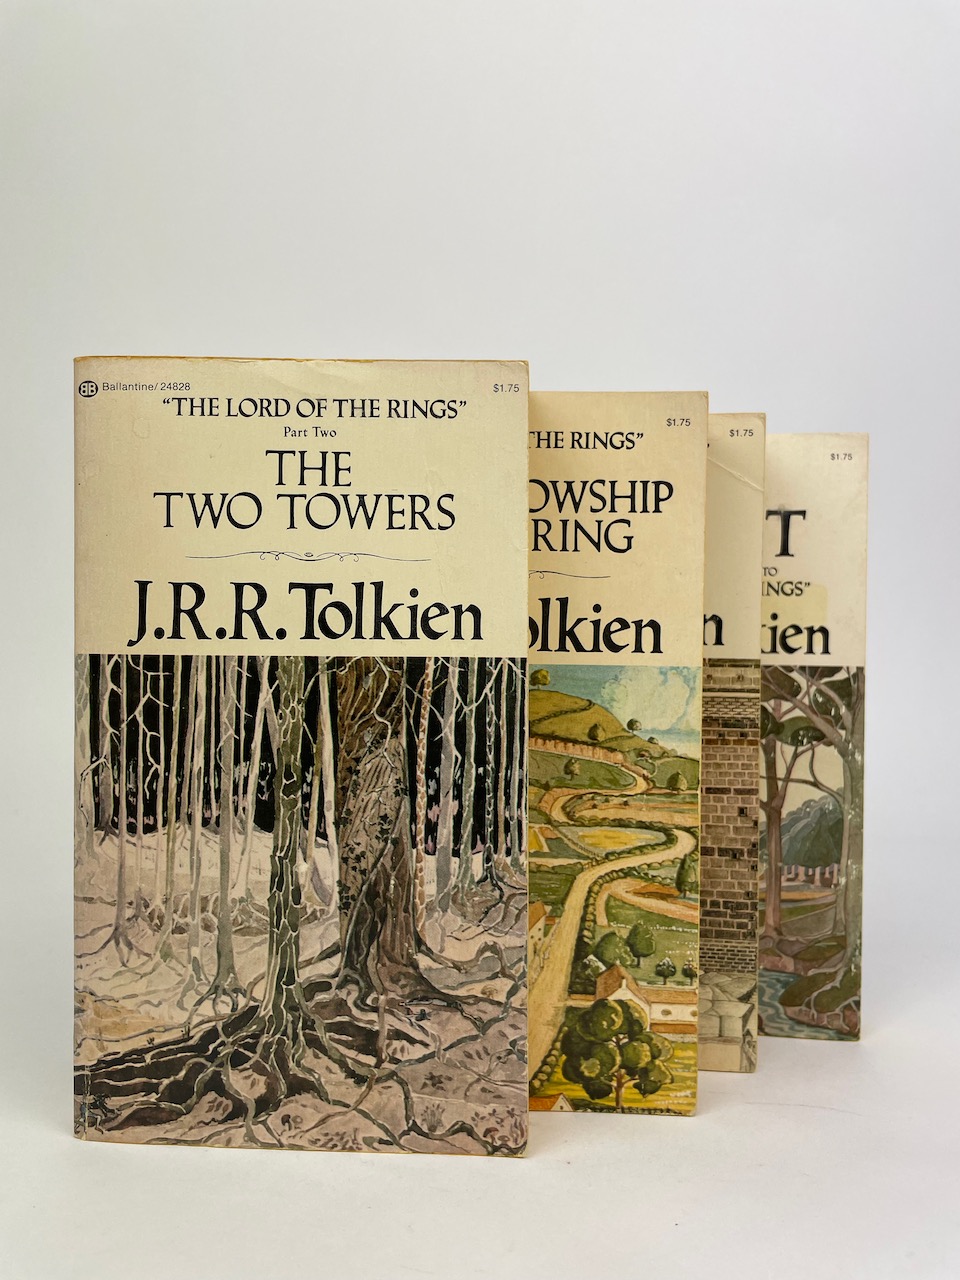 The Hobbit and The Lord of the Rings, Four Paperback Book Boxset from 1975, Gold Slipcase 15